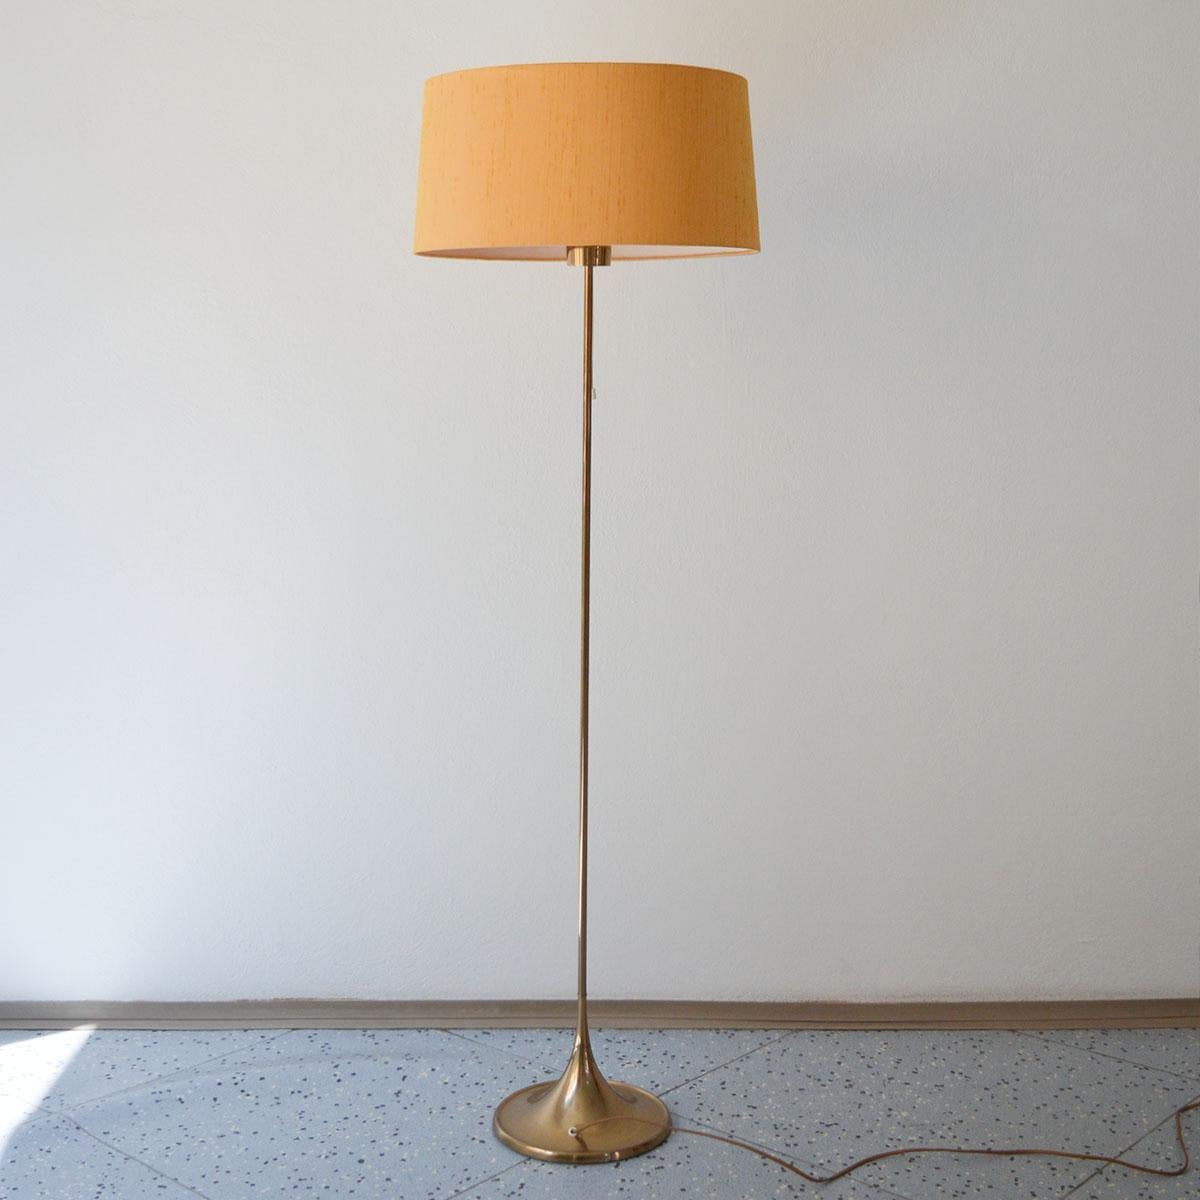 Swedish brass floor lamp, model G-026, designed by Alf Svensson and Yngvar Sandström and manufactured by Bergboms in Sweden, 1960s.

This elegant and rare Swedish brass floor lamp was designed by Alf Svensson and Yngvar Sandström and manufactured